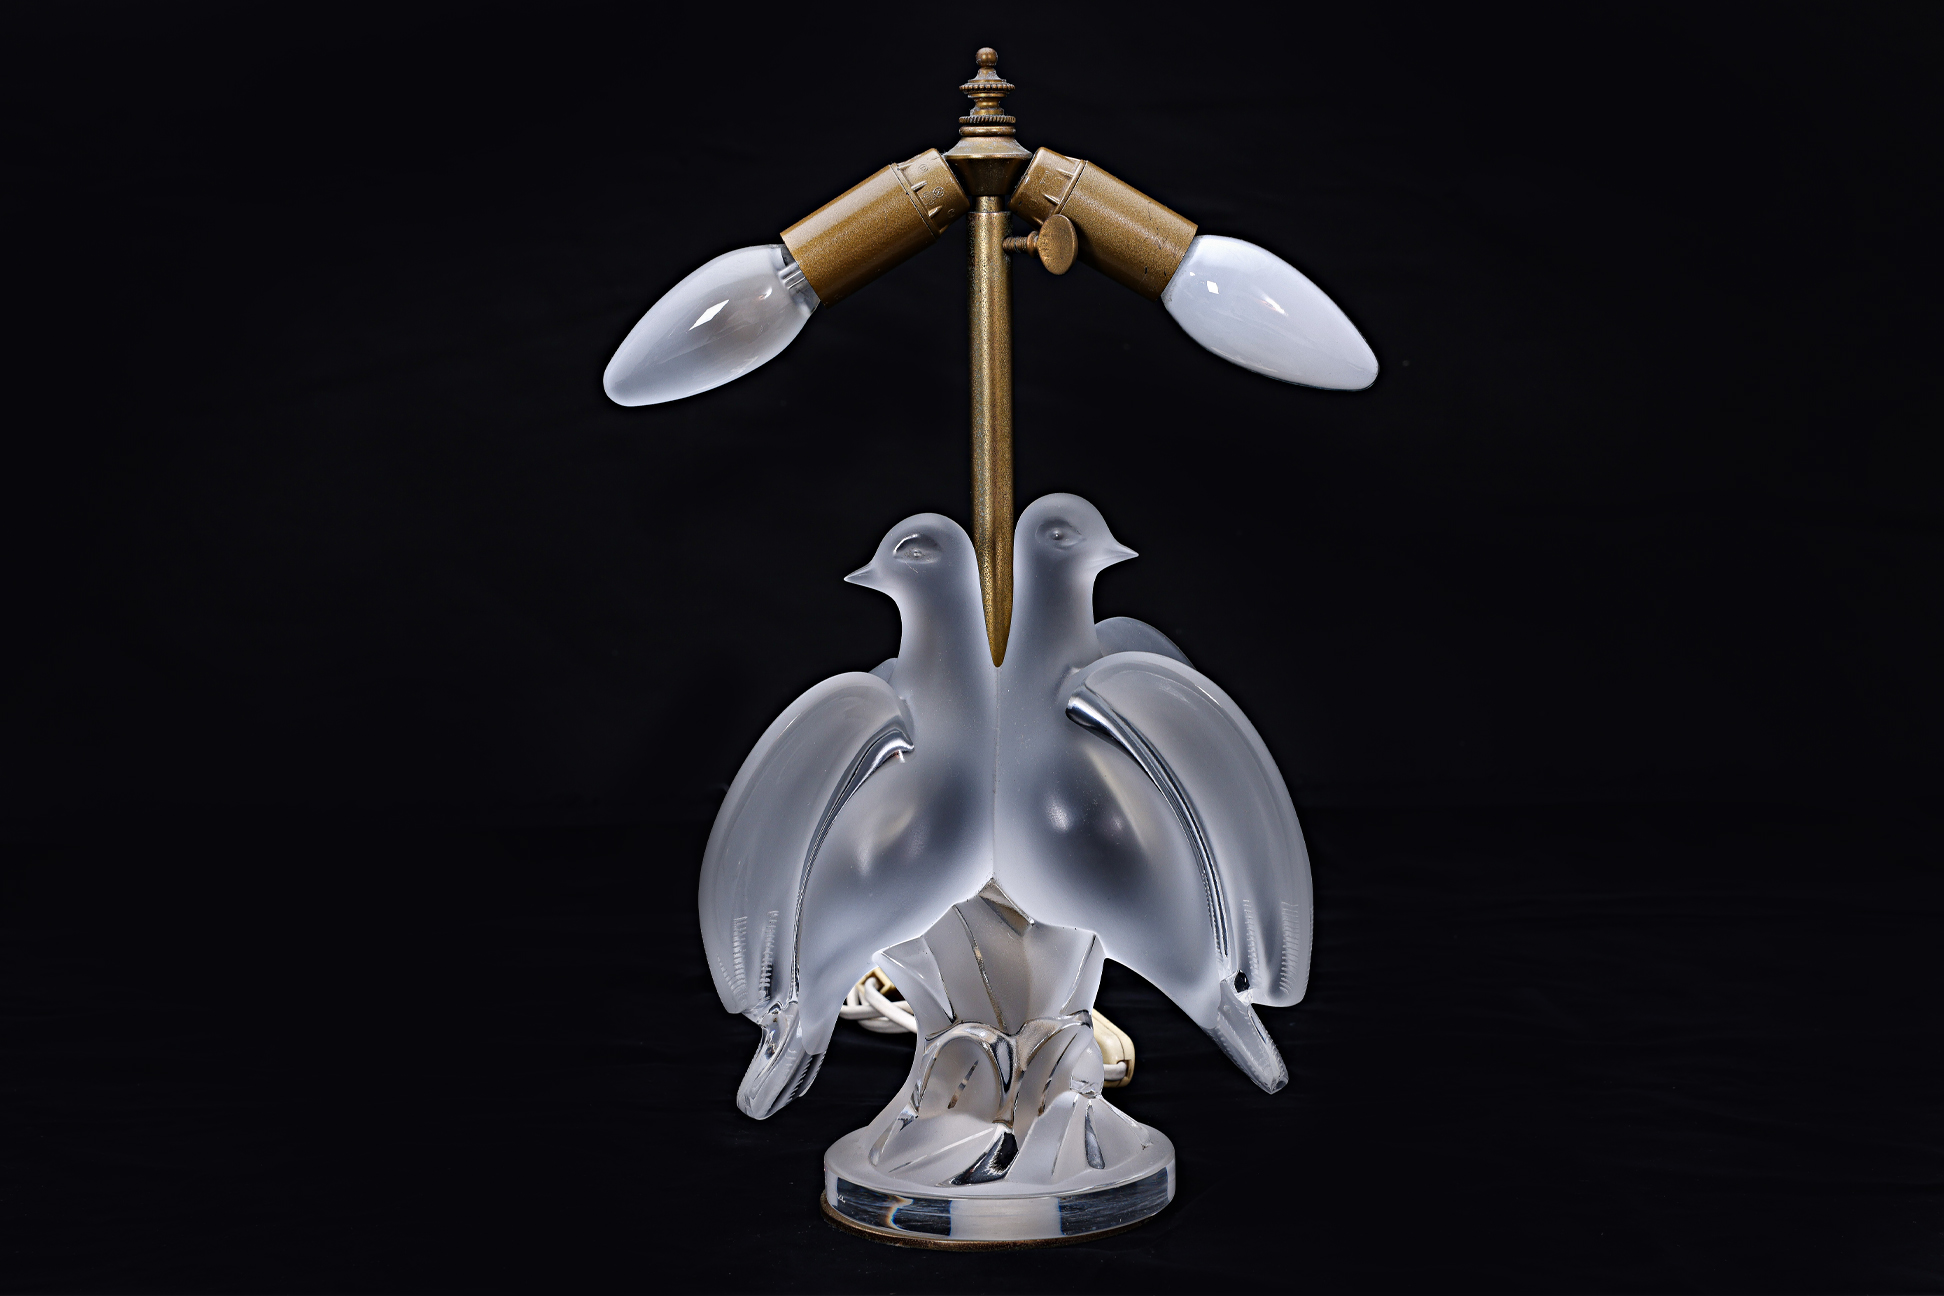 A LALIQUE 'ARIANE' FROSTED GLASS DOVES TABLE LAMP